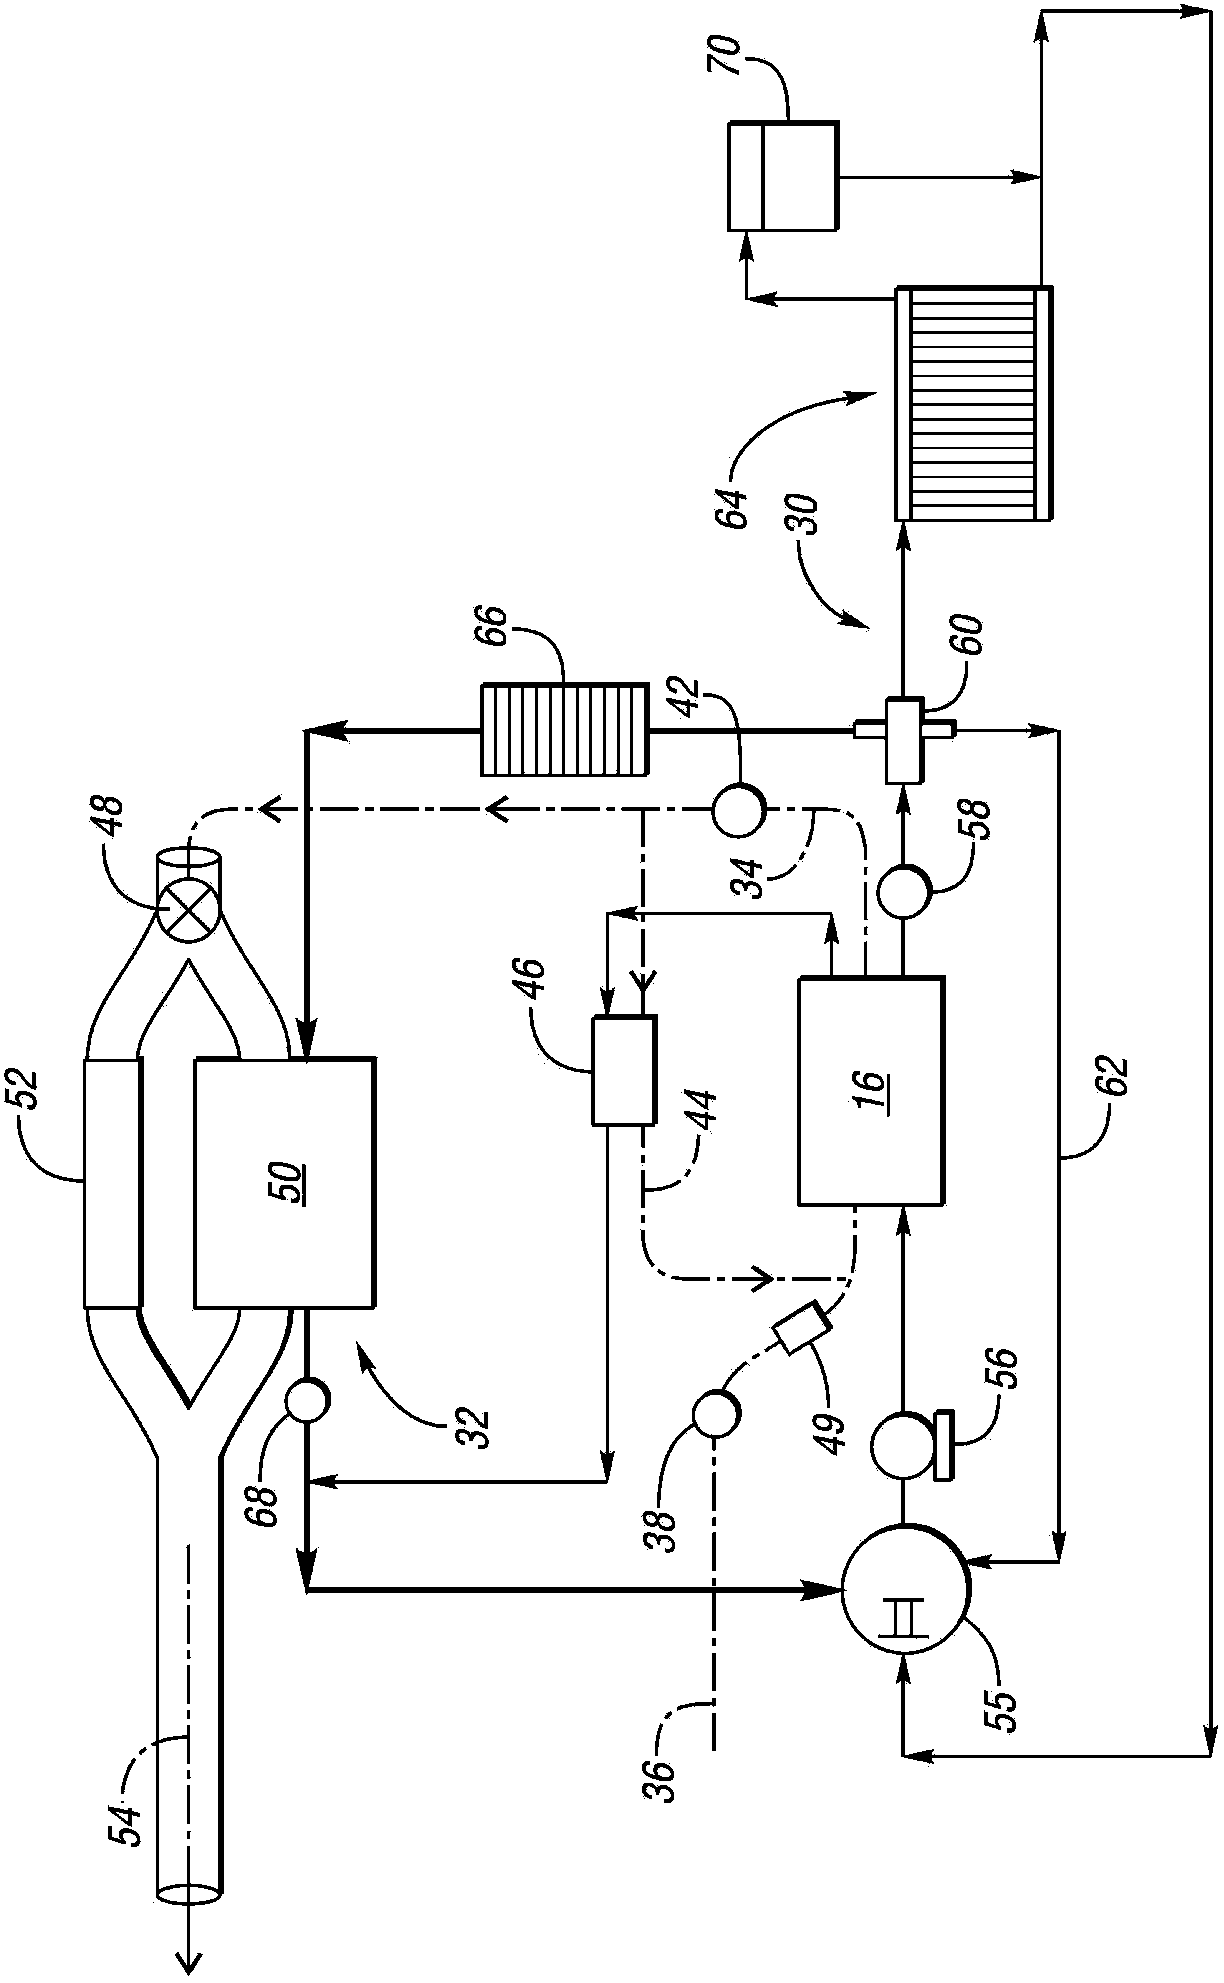 Method to control and diagnose an exhaust gas heat exchanger